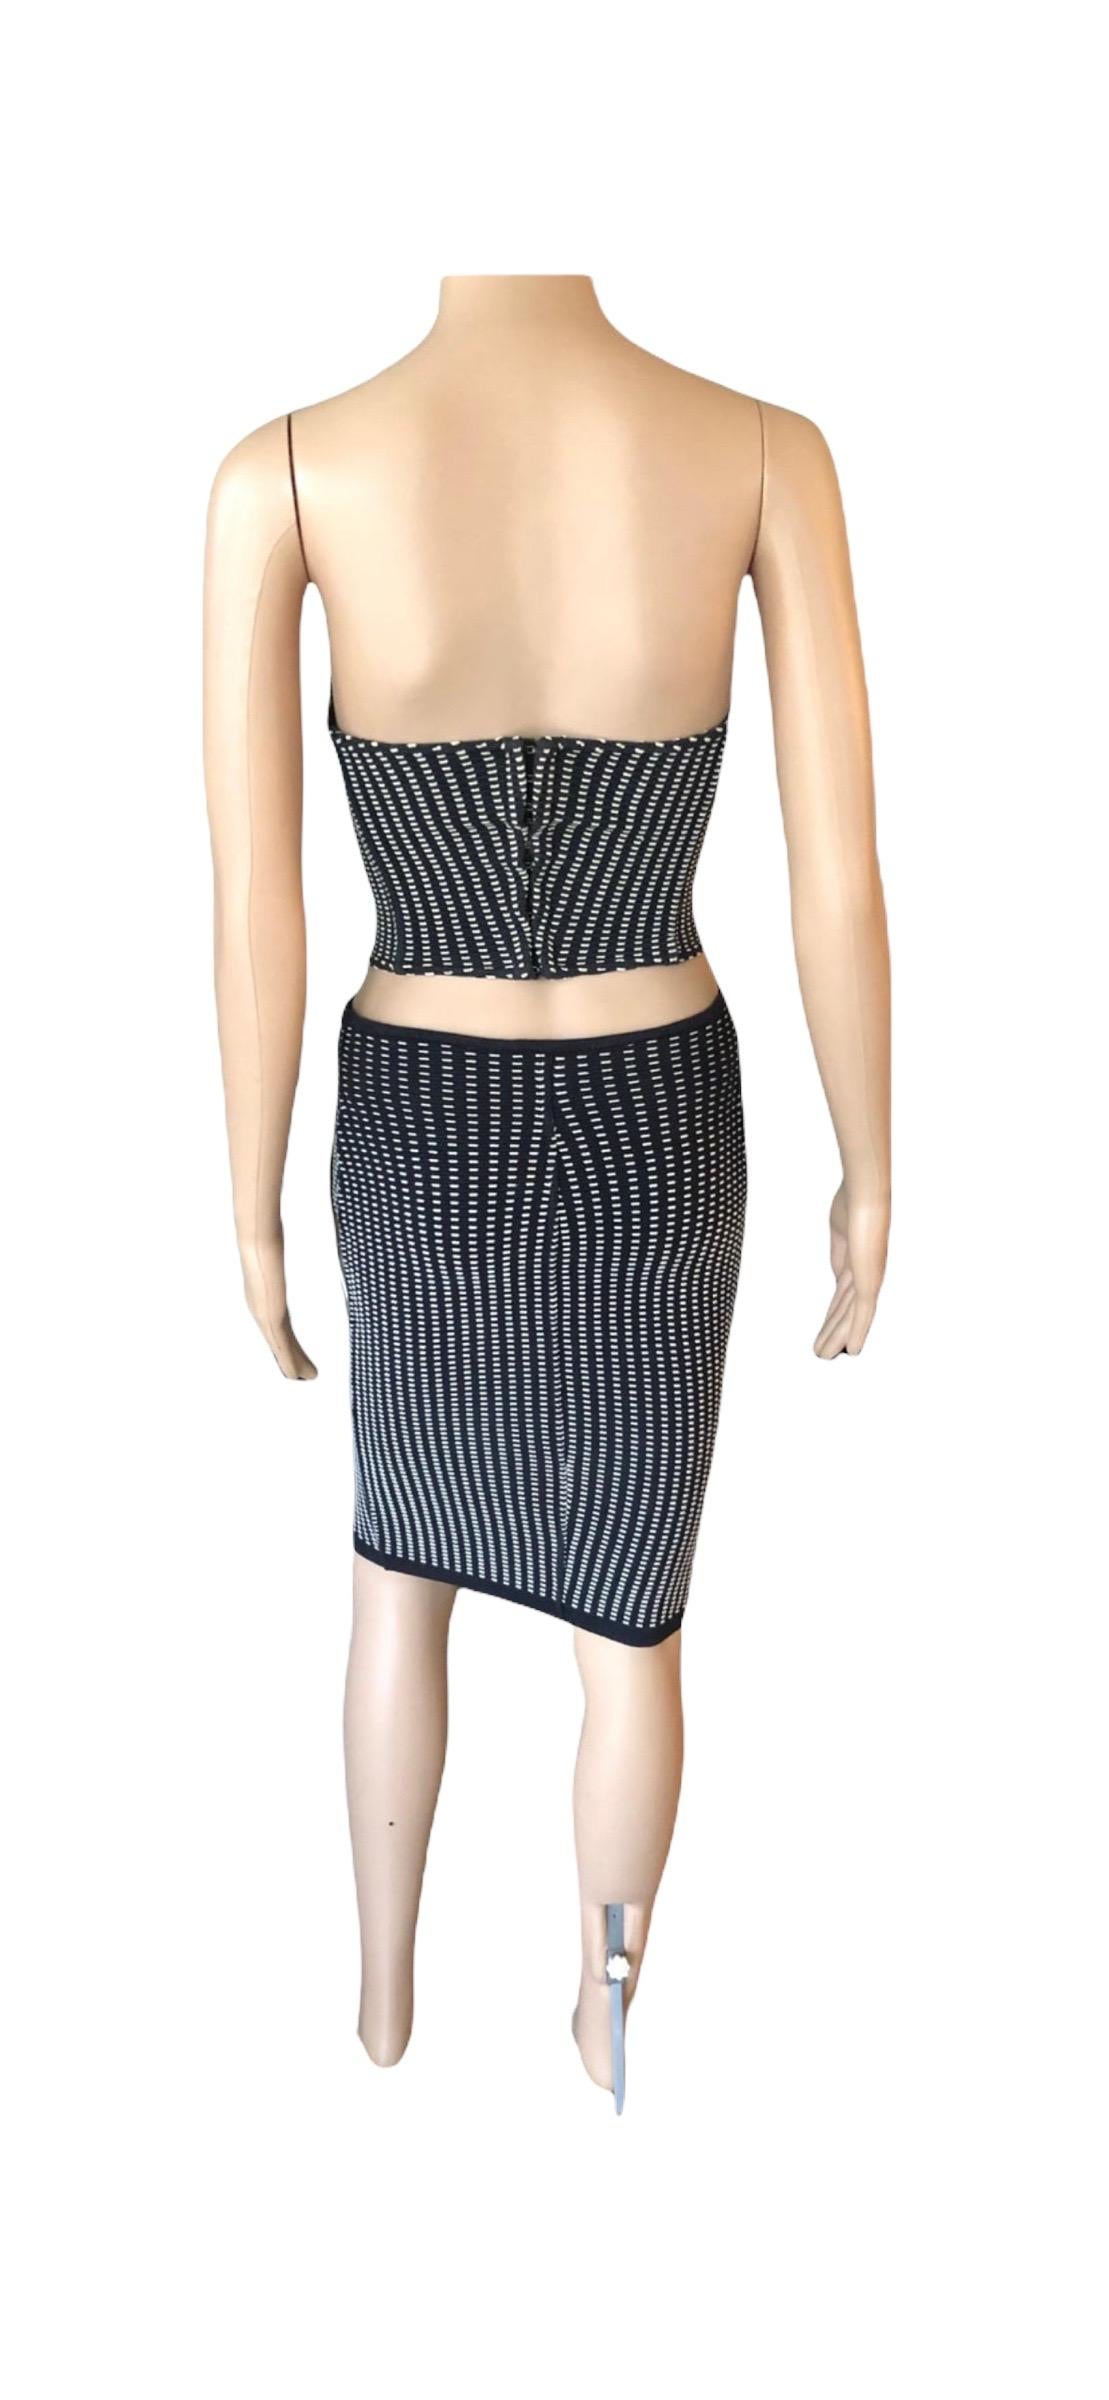 Azzedine Alaia S/S 1991 Vintage Skirt and Bustier Crop Top 2 Piece Set  9